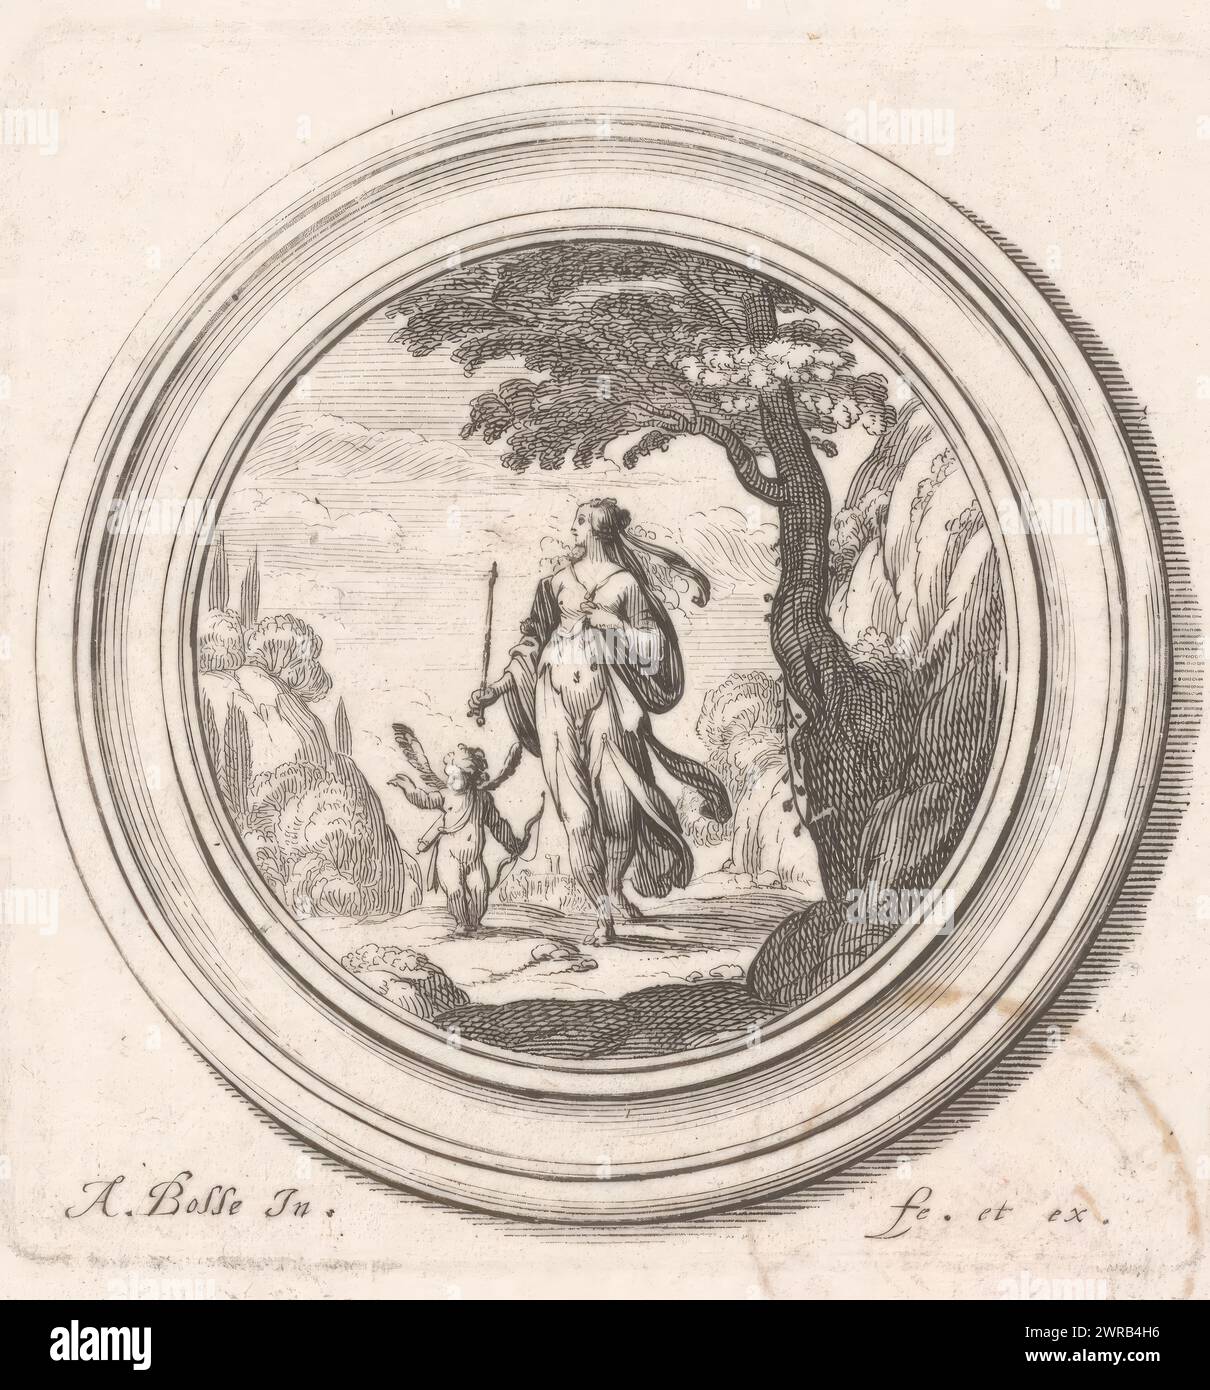 Venus and Amor in a landscape, print maker: Abraham Bosse, after own design by: Abraham Bosse, publisher: Abraham Bosse, 1612 - 1676, paper, etching, engraving, height 71 mm × width 71 mm, print Stock Photo